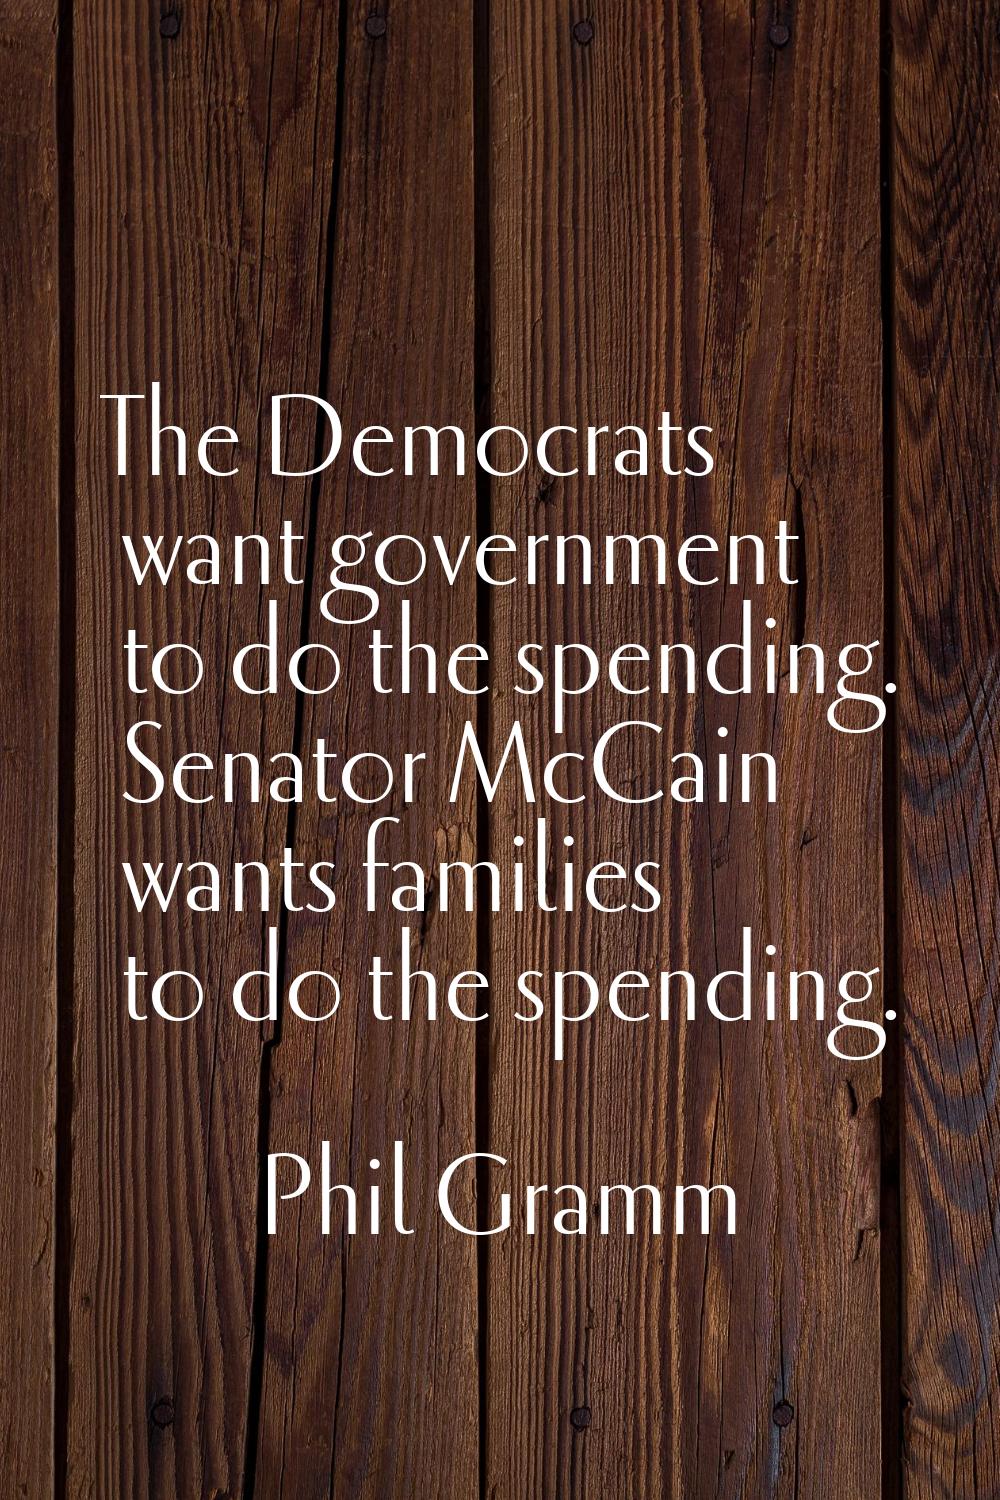 The Democrats want government to do the spending. Senator McCain wants families to do the spending.